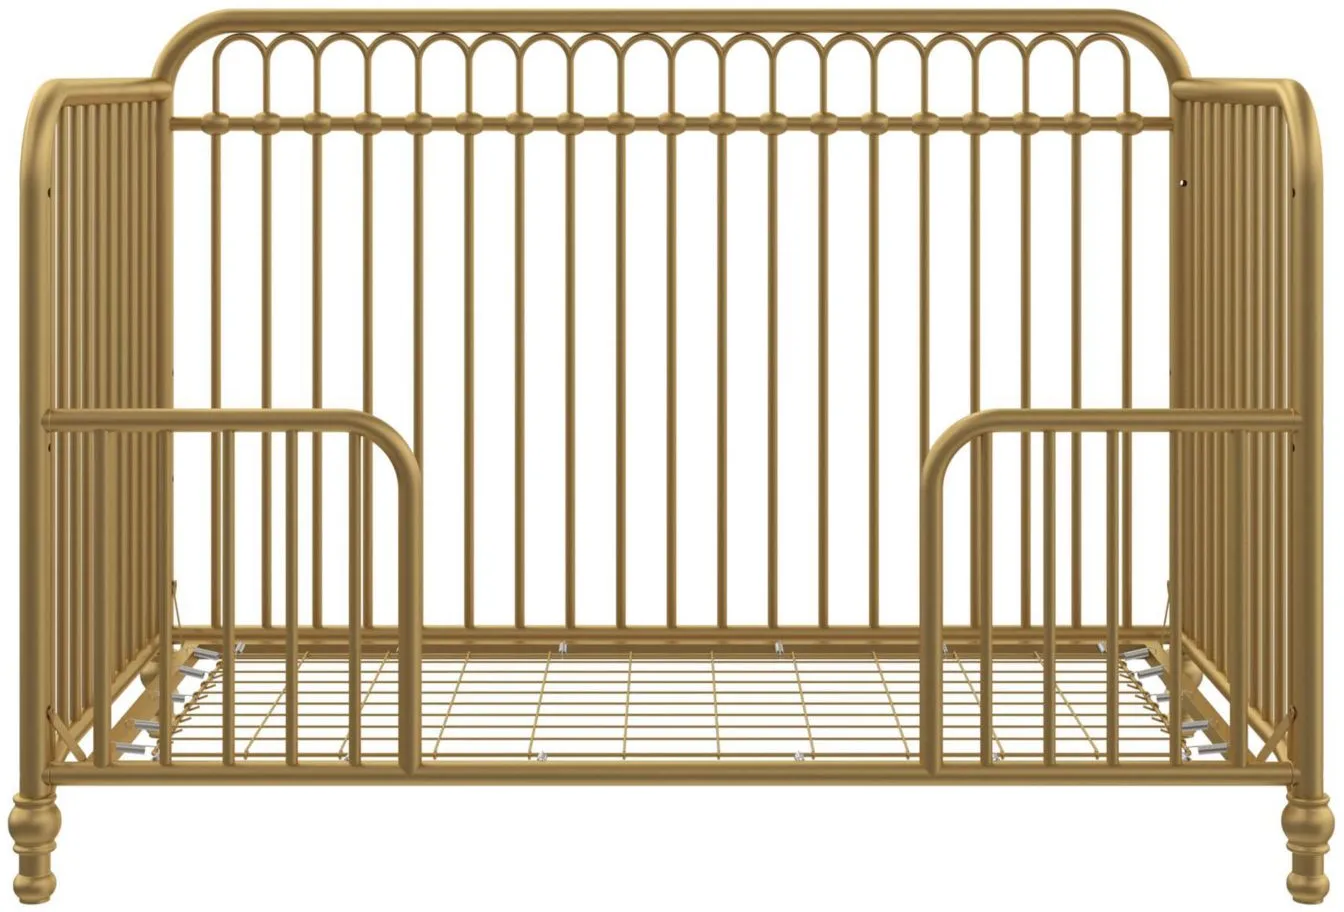 Raven 3-in-1 Convertible Metal Crib in Gold by DOREL HOME FURNISHINGS